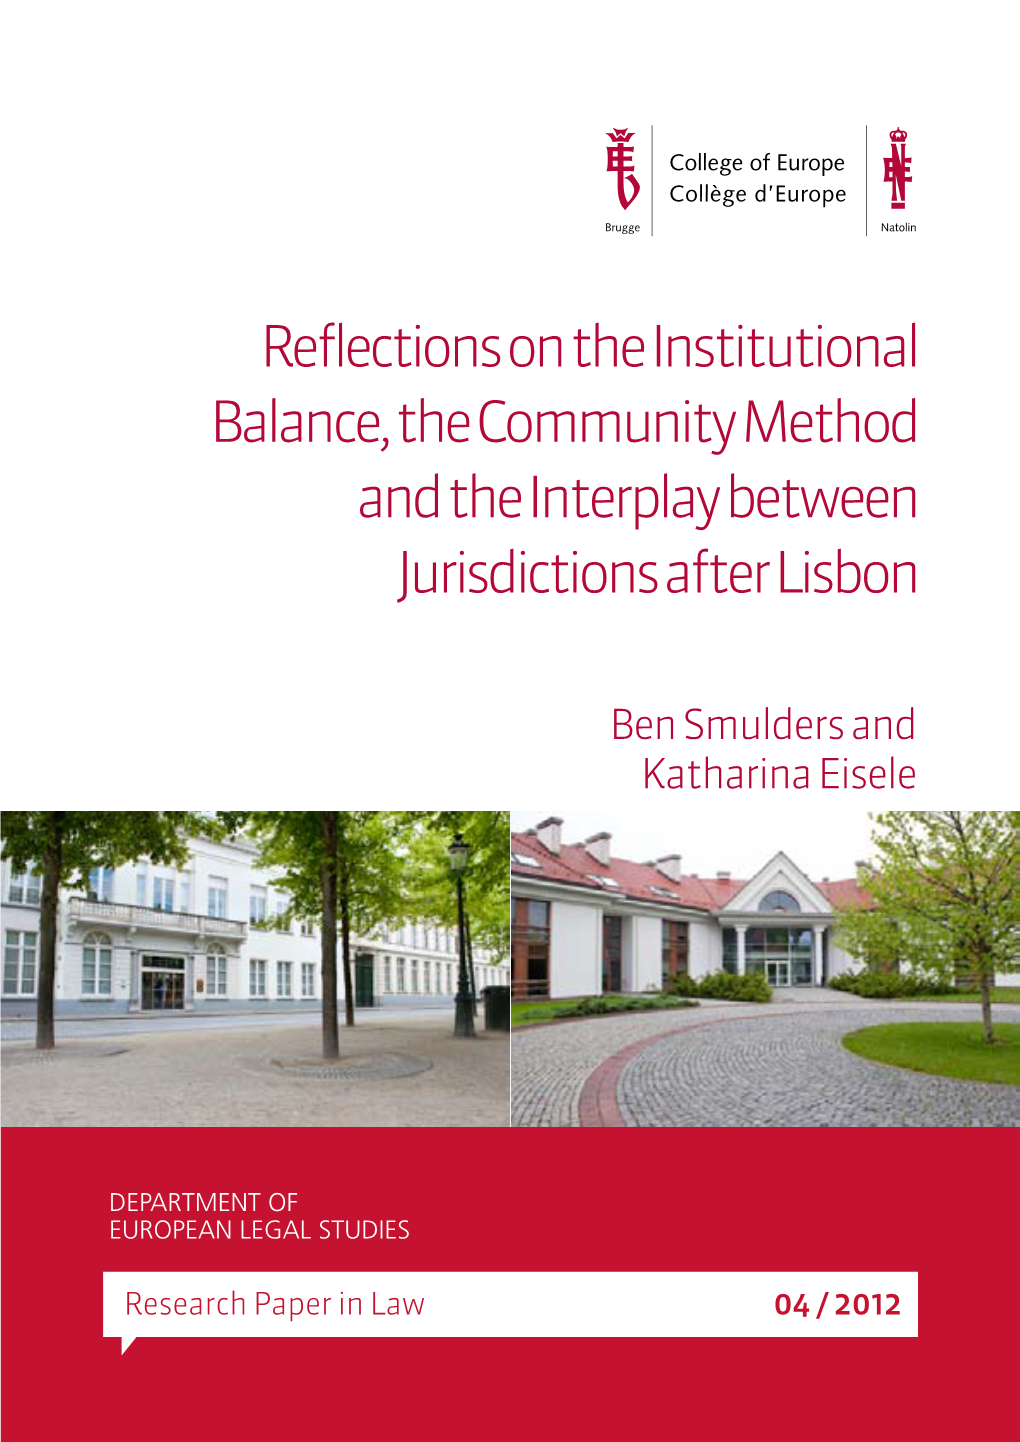 Institutional Balance, the Community Method and the Interplay Between Jurisdictions After Lisbon